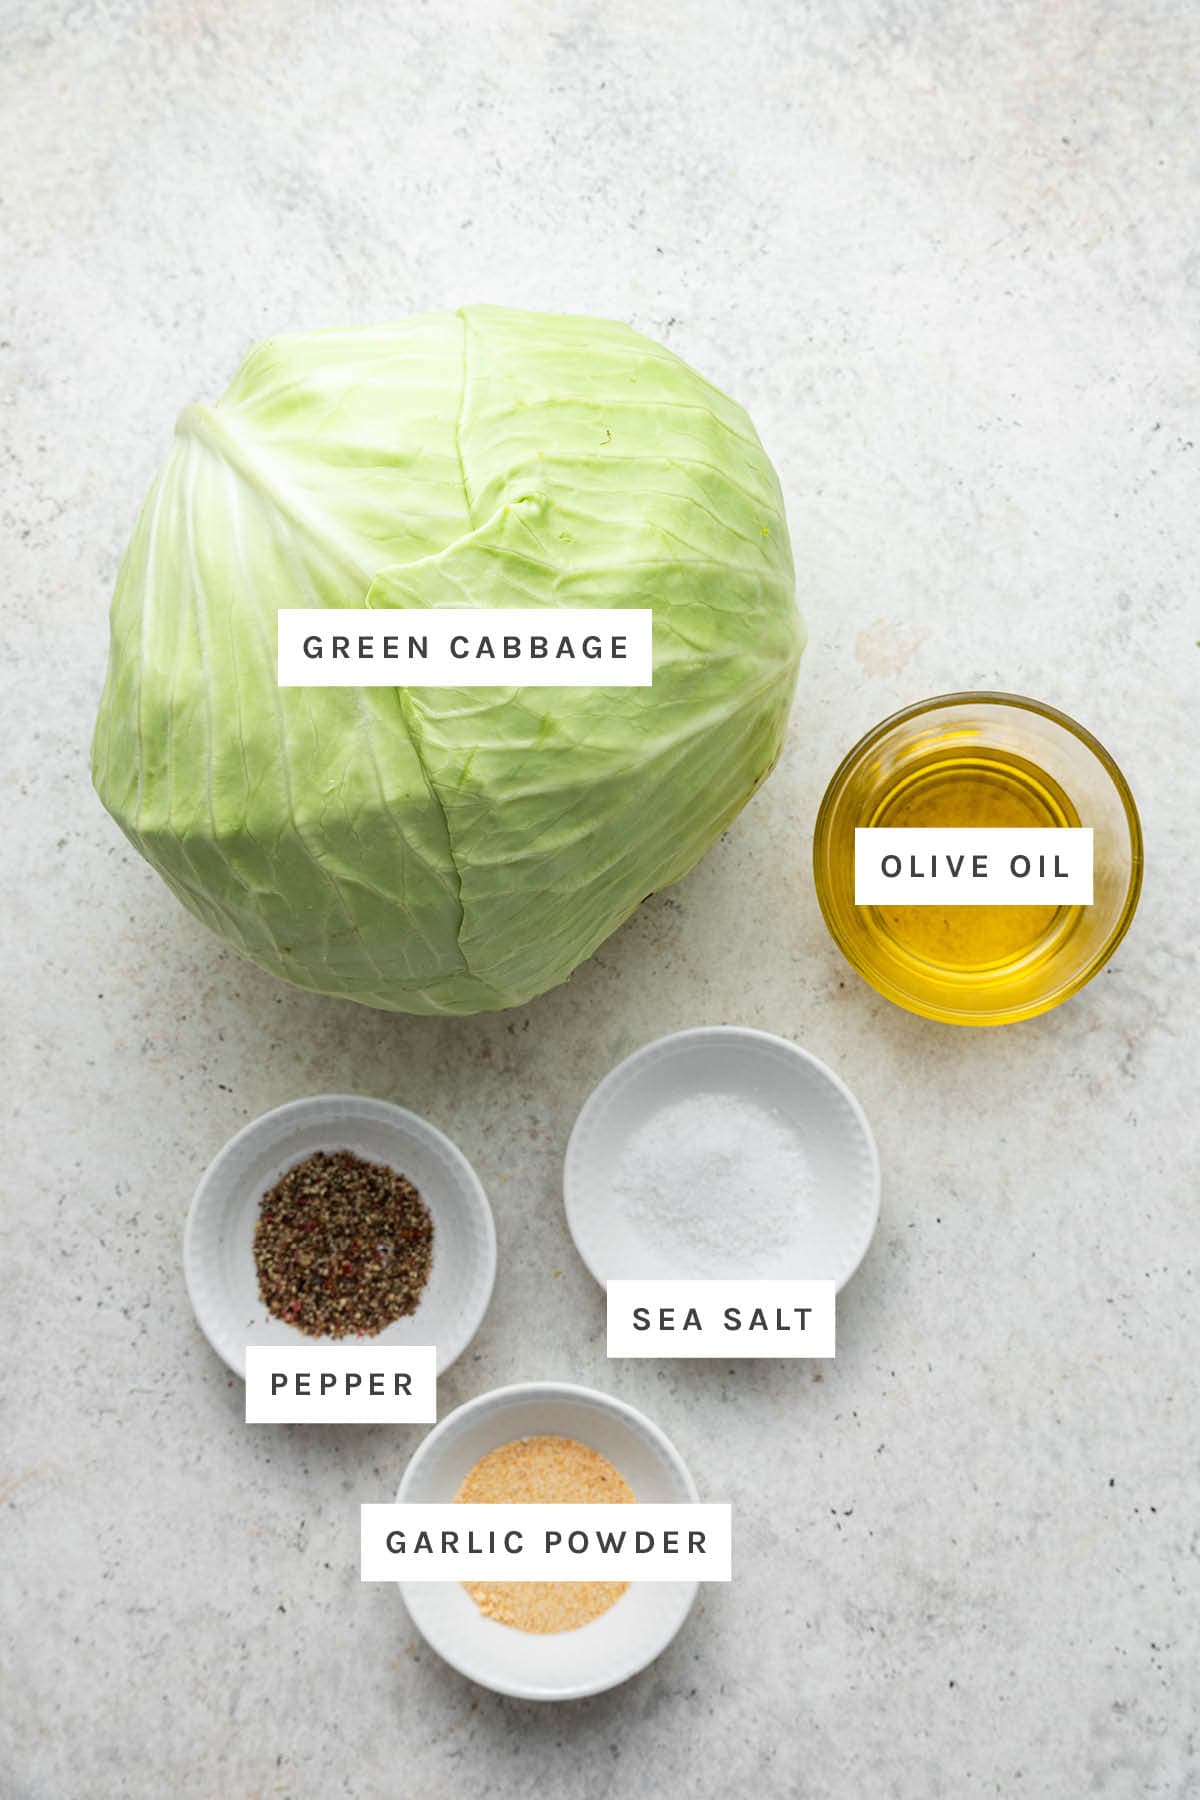 Ingredients measured out to make Roasted Cabbage: green cabbage, olive oil, pepper, sea salt and garlic.